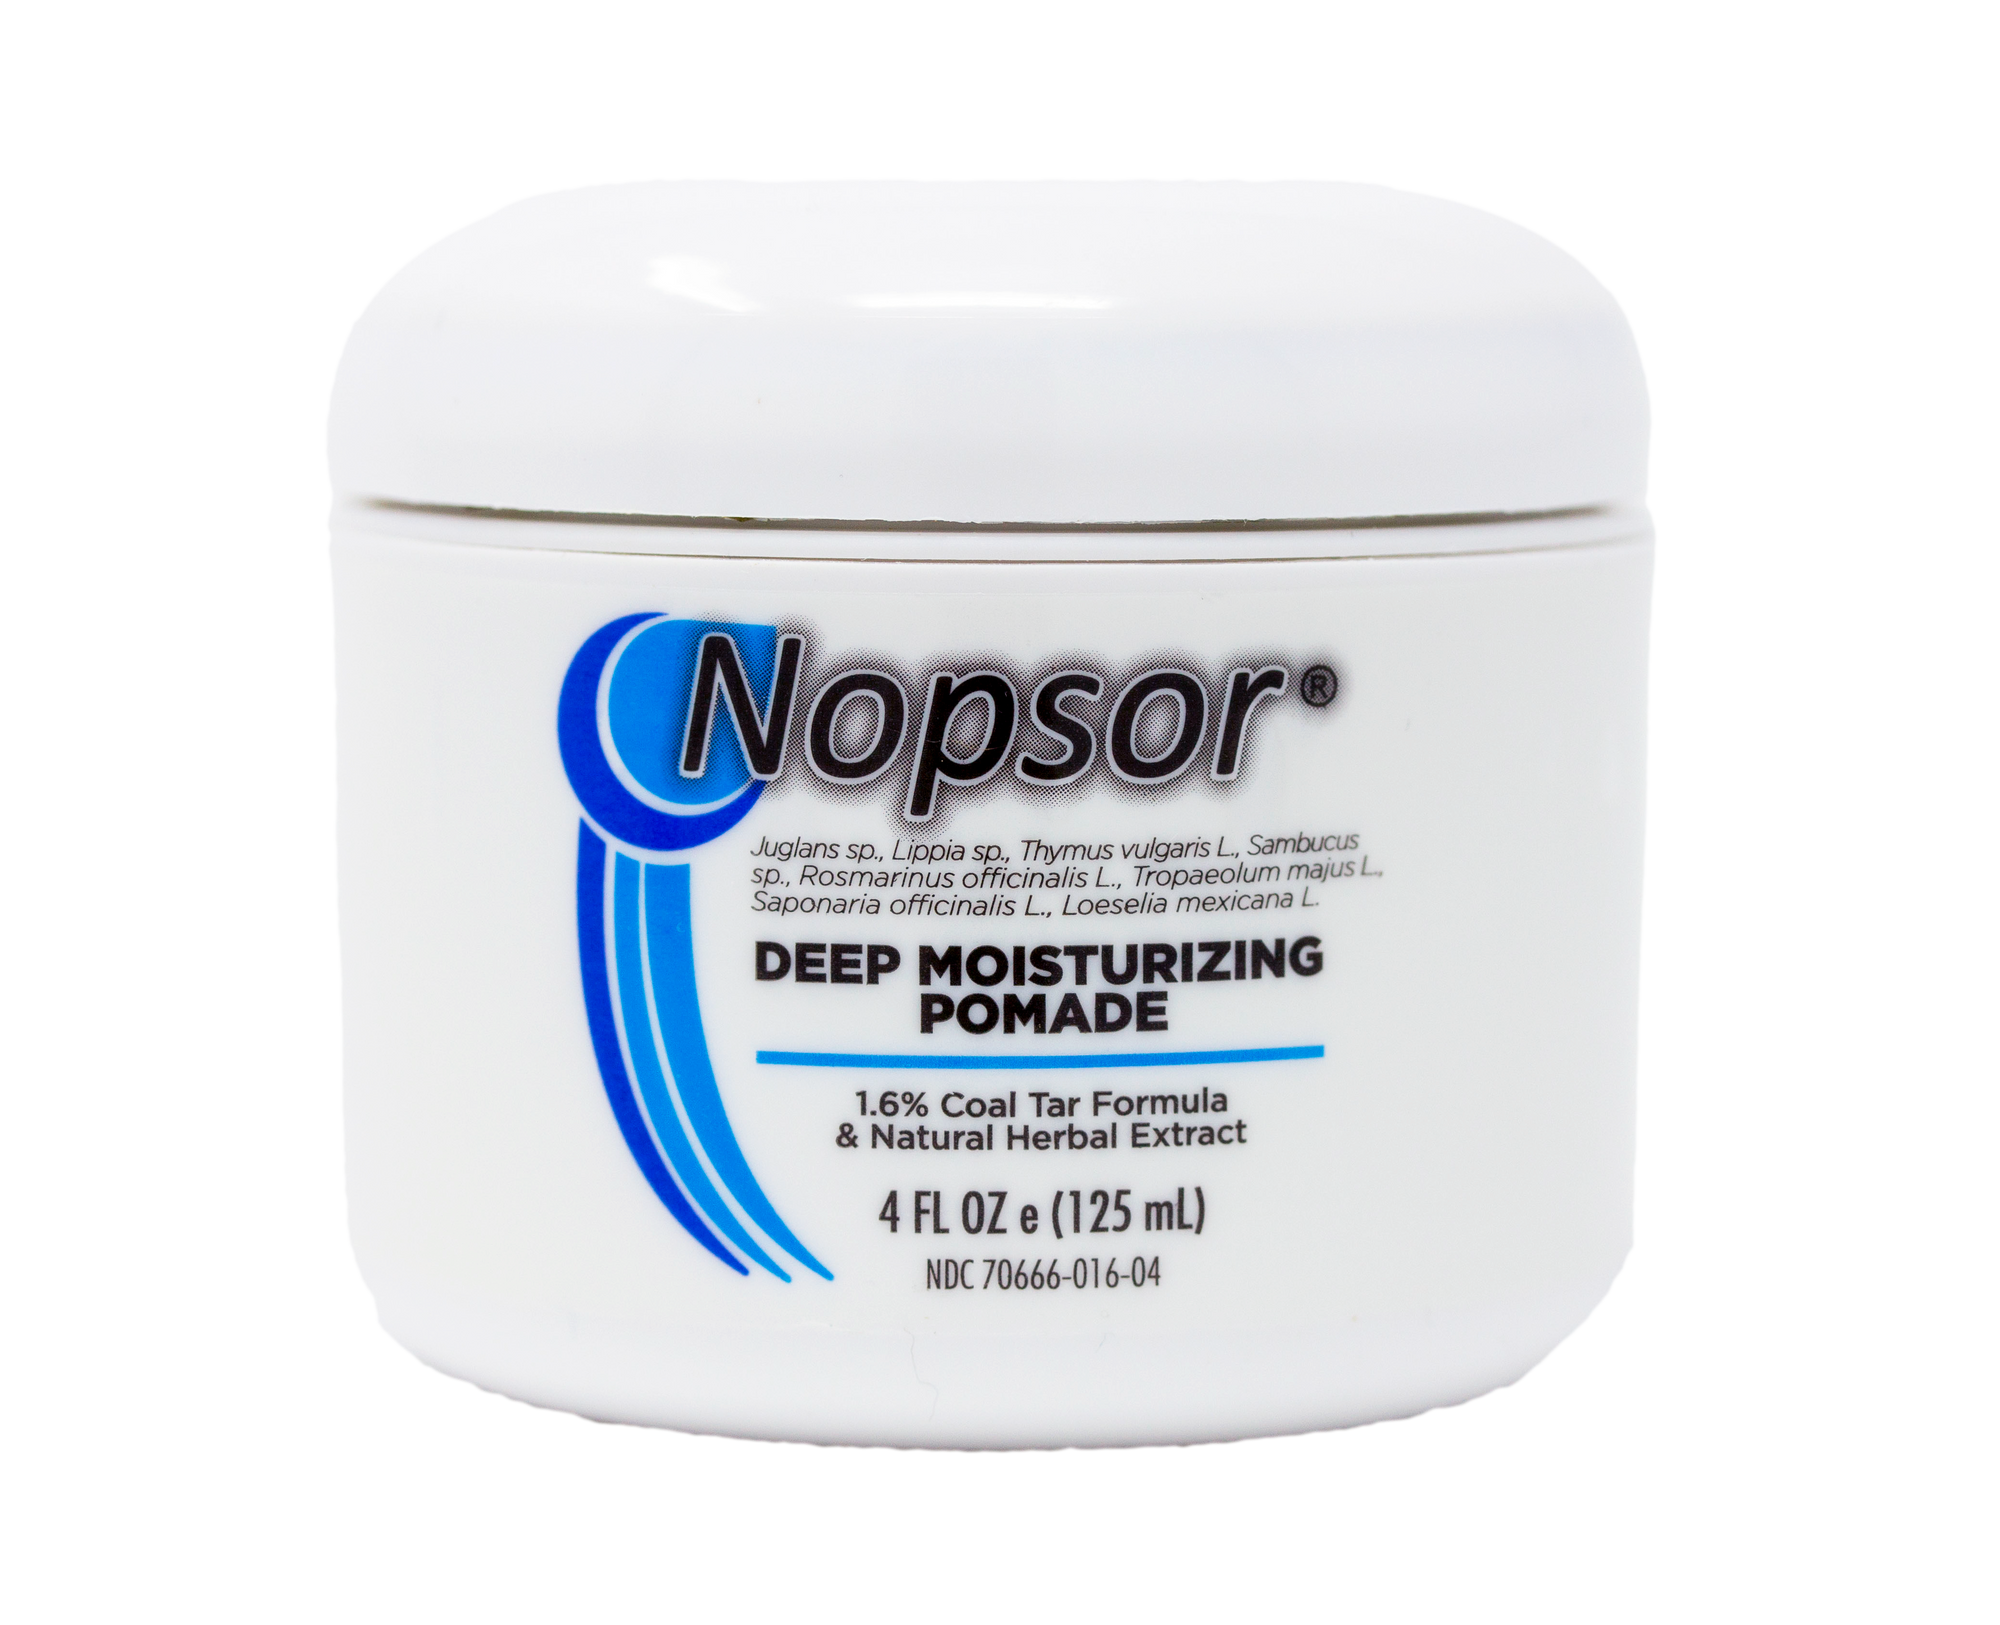 Nopsor Picture Ointment